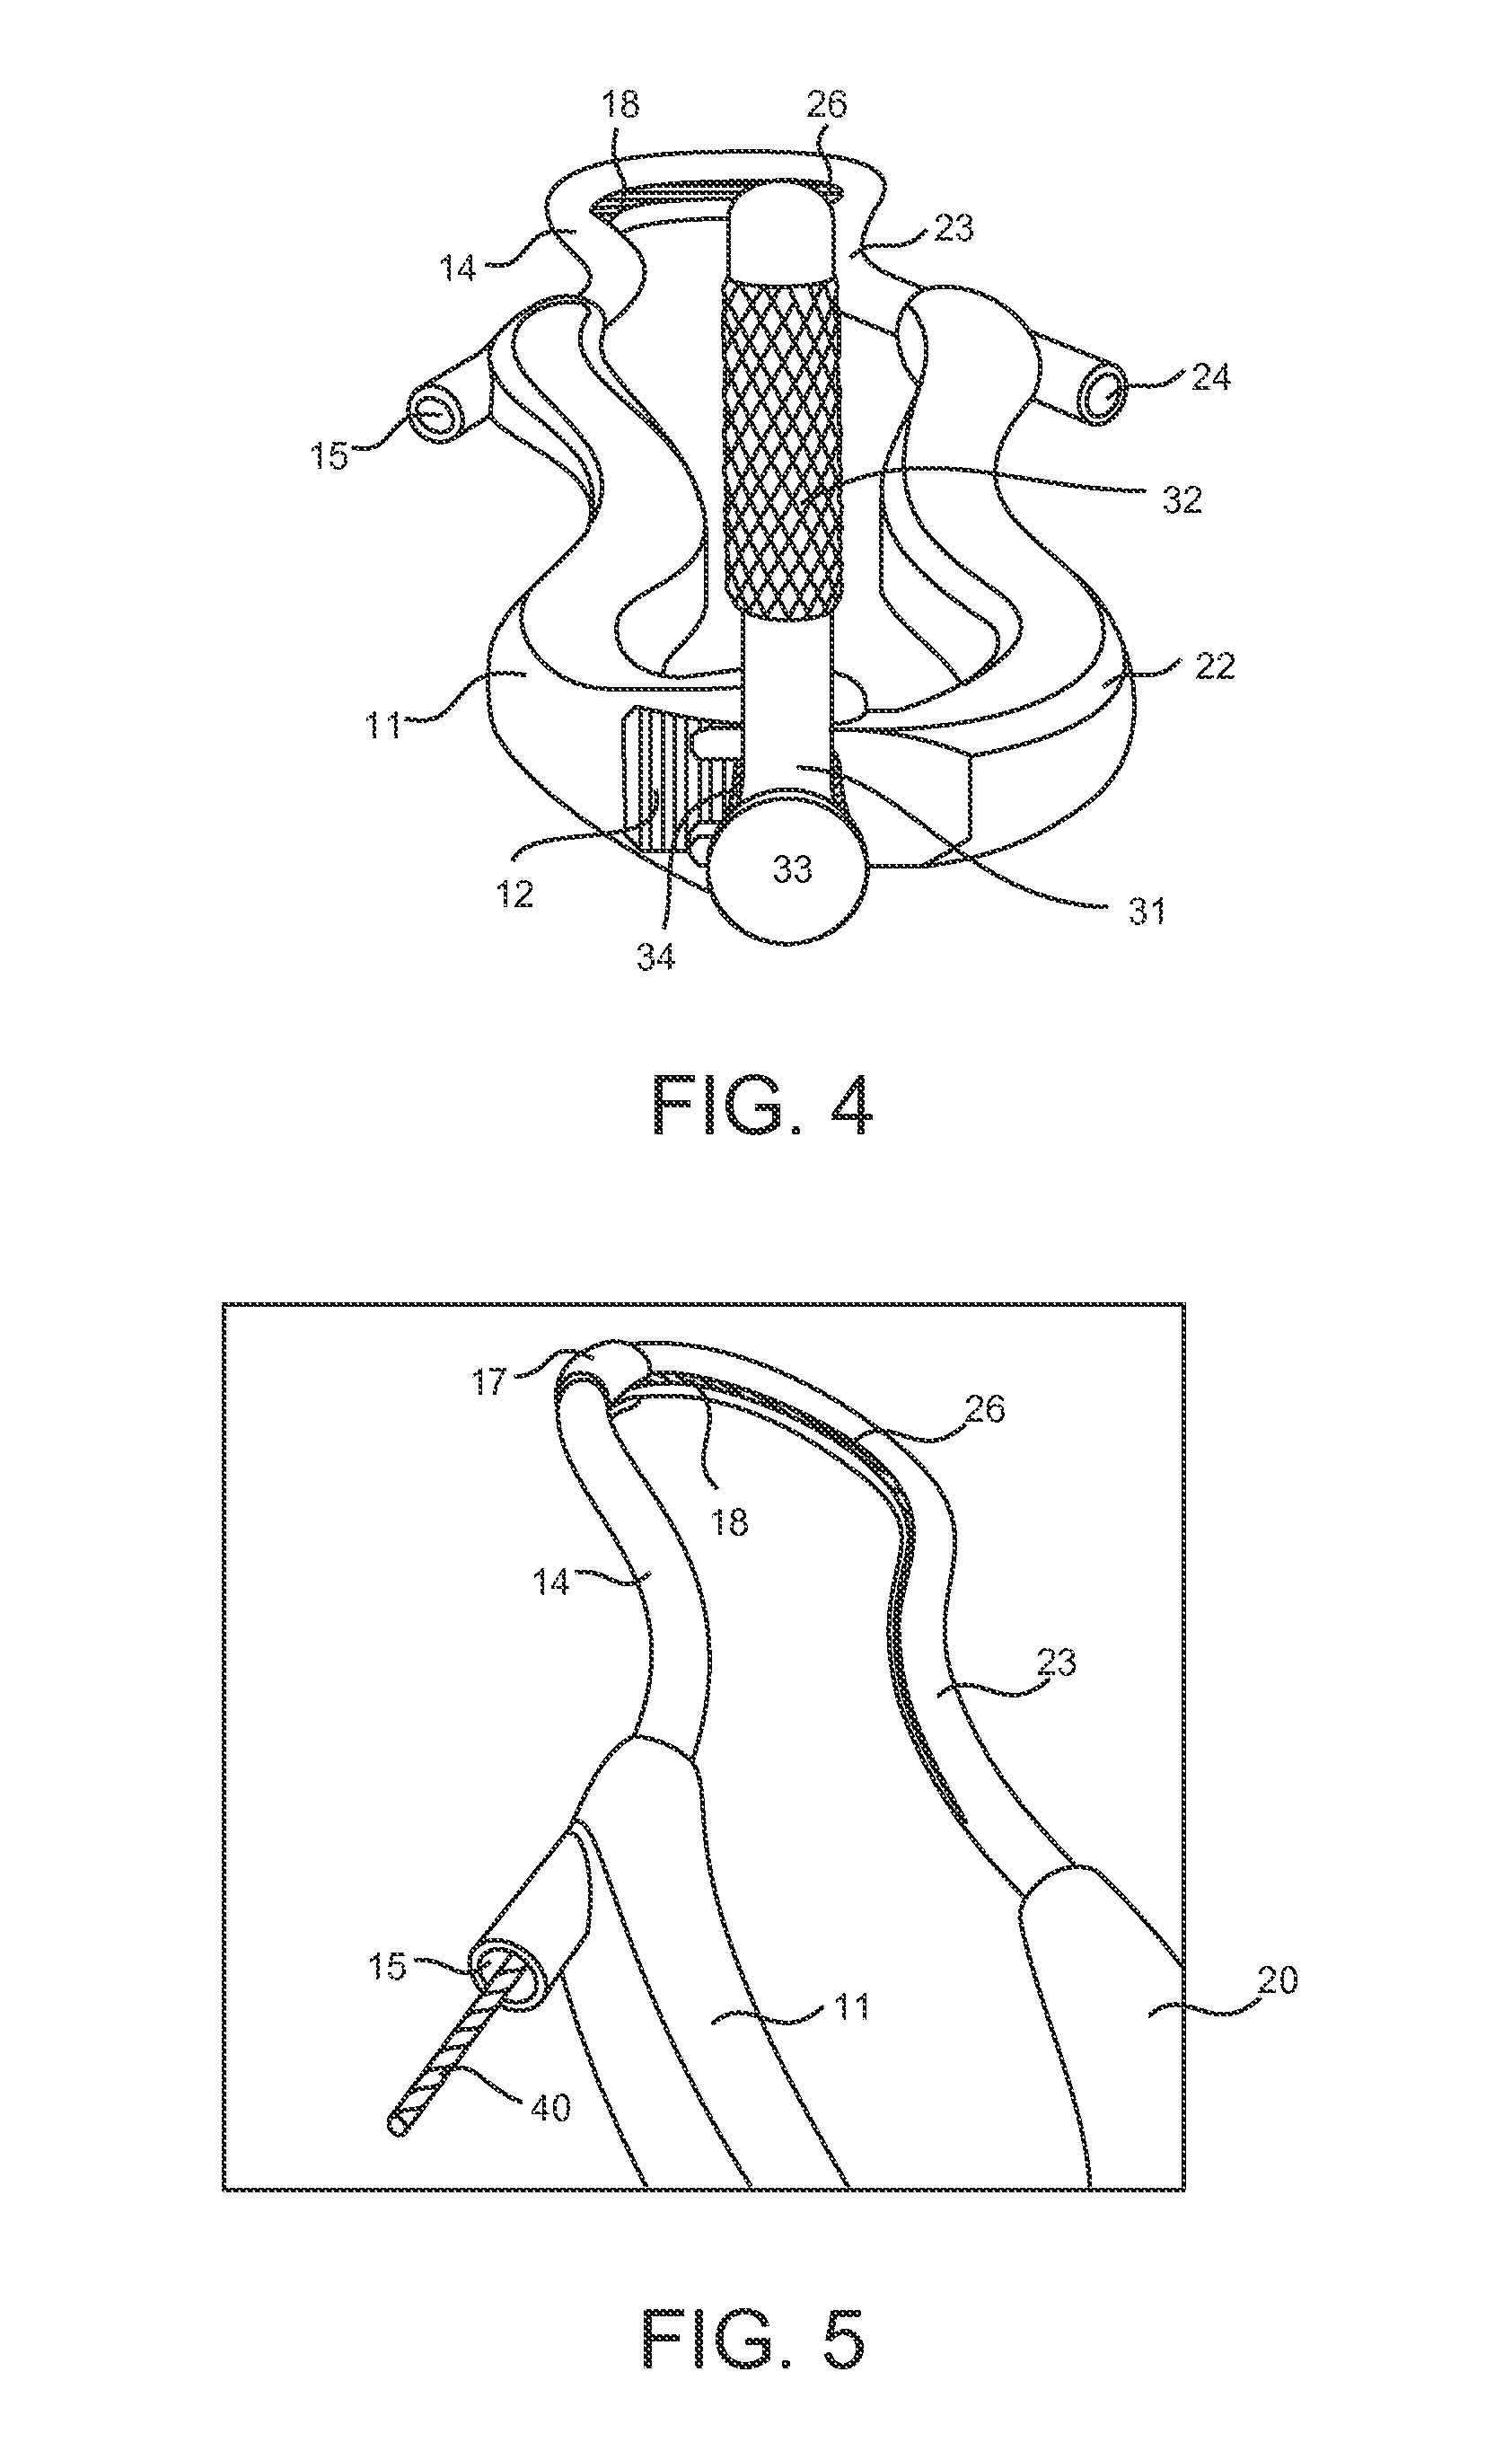 Minimally invasive device for surgical operations